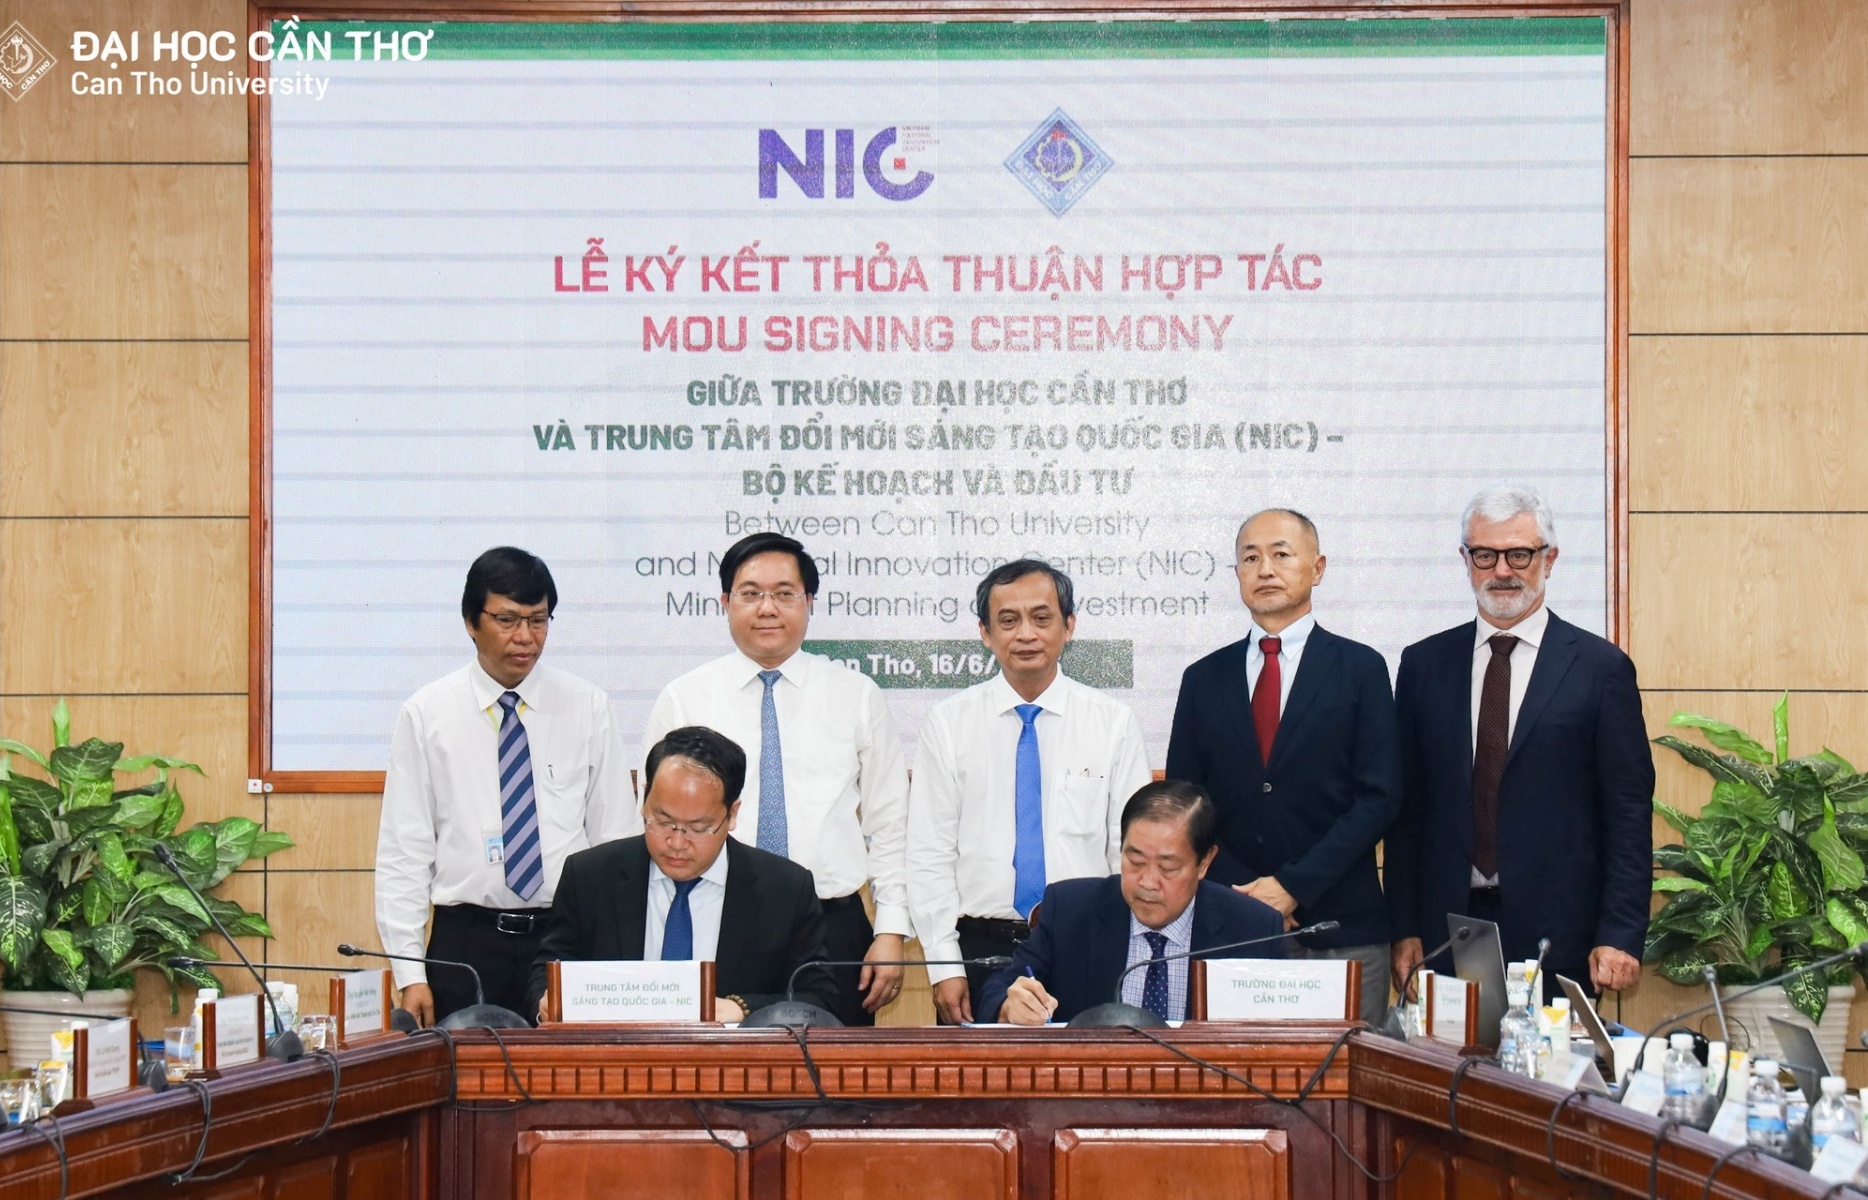 NIC and Can Tho University to develop startups in the Mekong River Delta